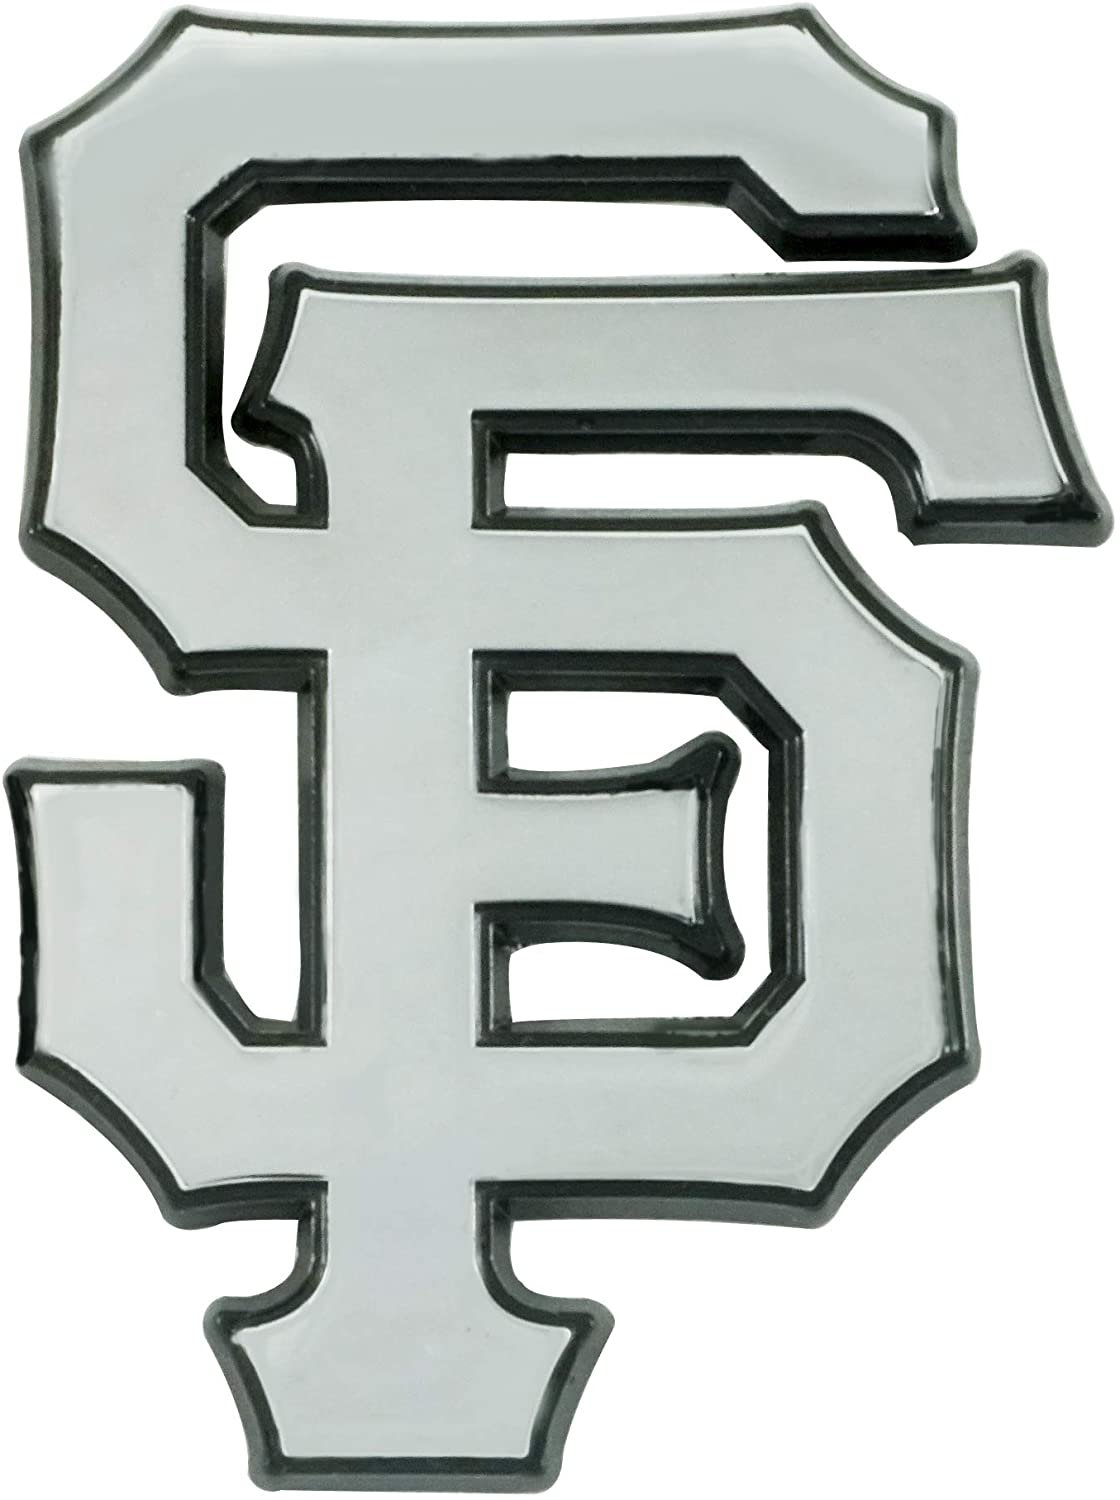 San Francisco Giants Solid Metal Raised Auto Emblem Decal Adhesive Backing